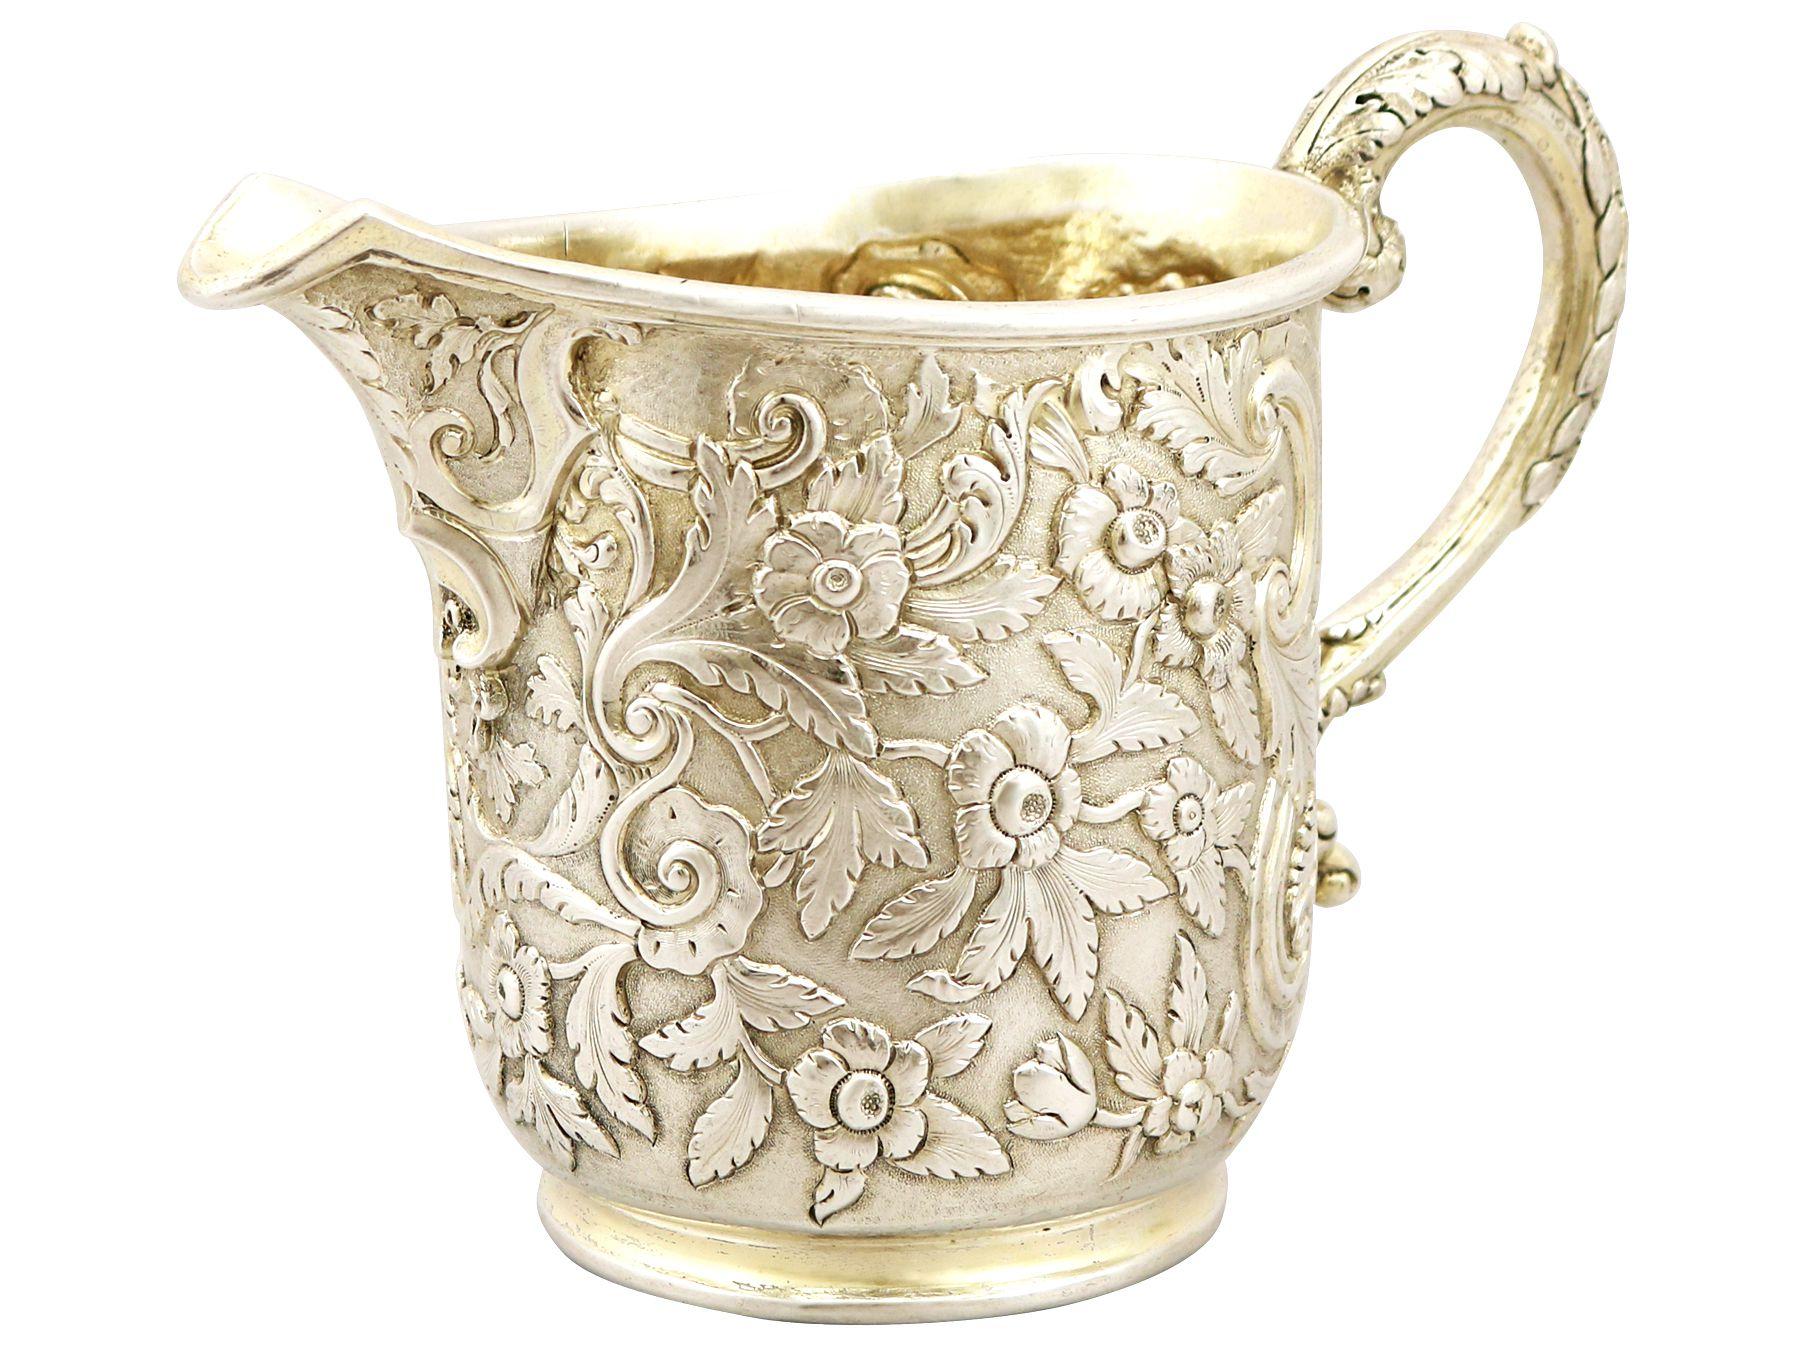 1830s Antique Indian Colonial Silver Jug In Excellent Condition For Sale In Jesmond, Newcastle Upon Tyne